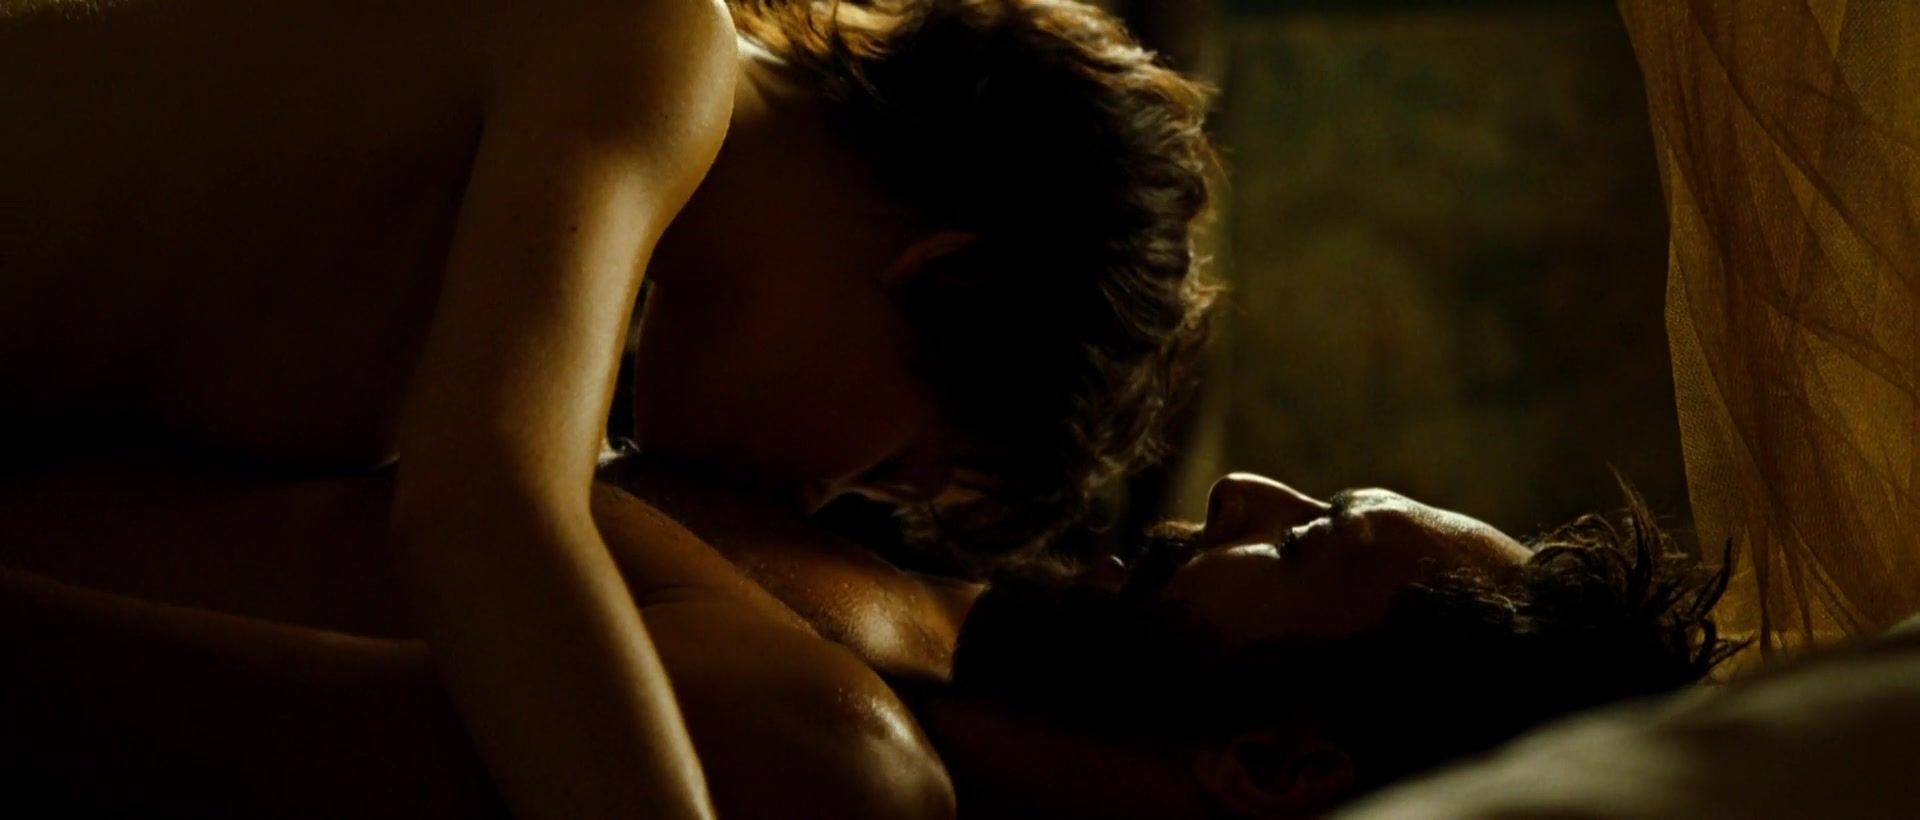 FamousBoard Melanie Thierry nude - Largo Winch (2008) Real Couple - 2